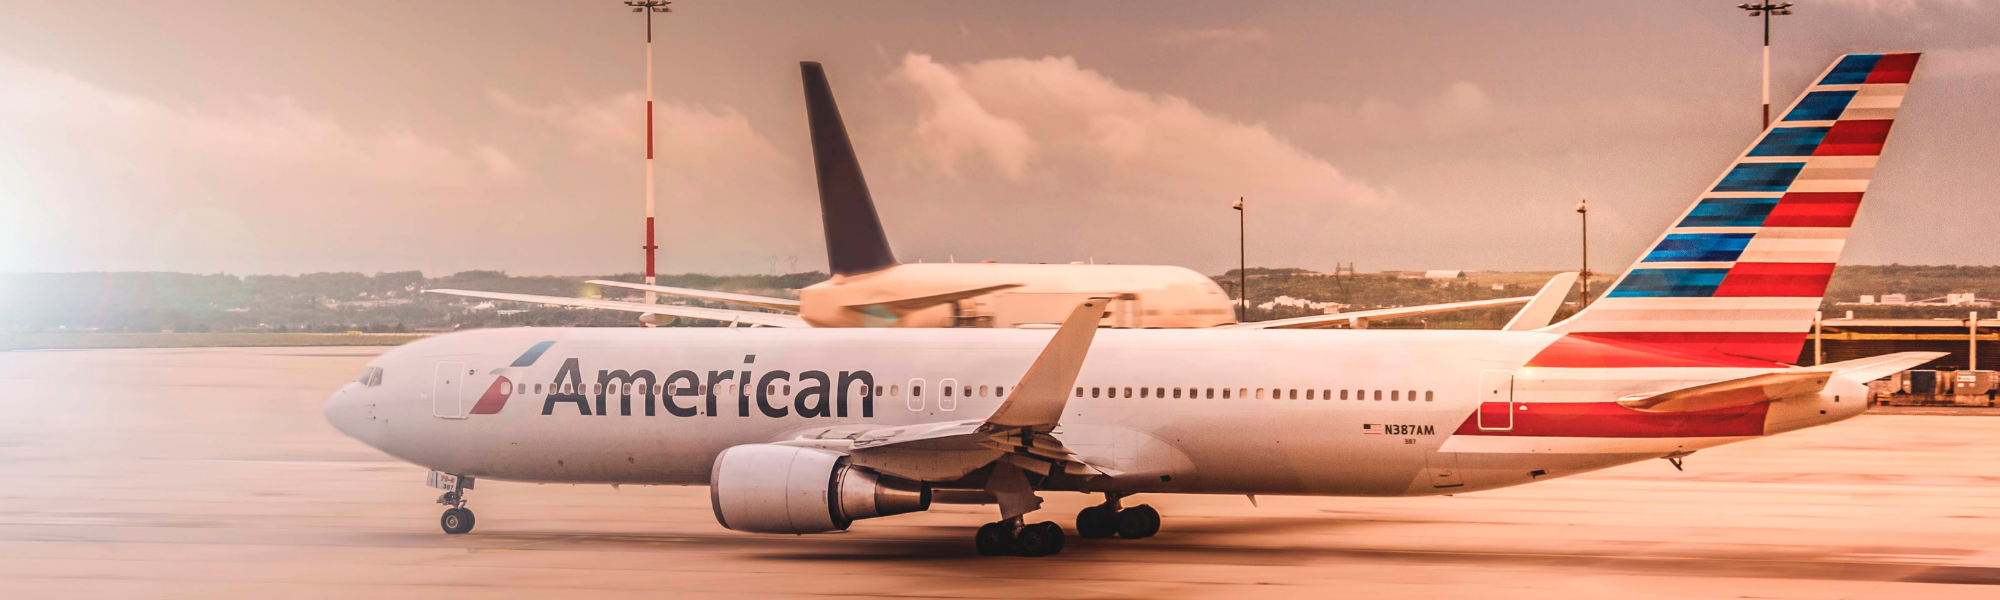 American Airlines Sunset